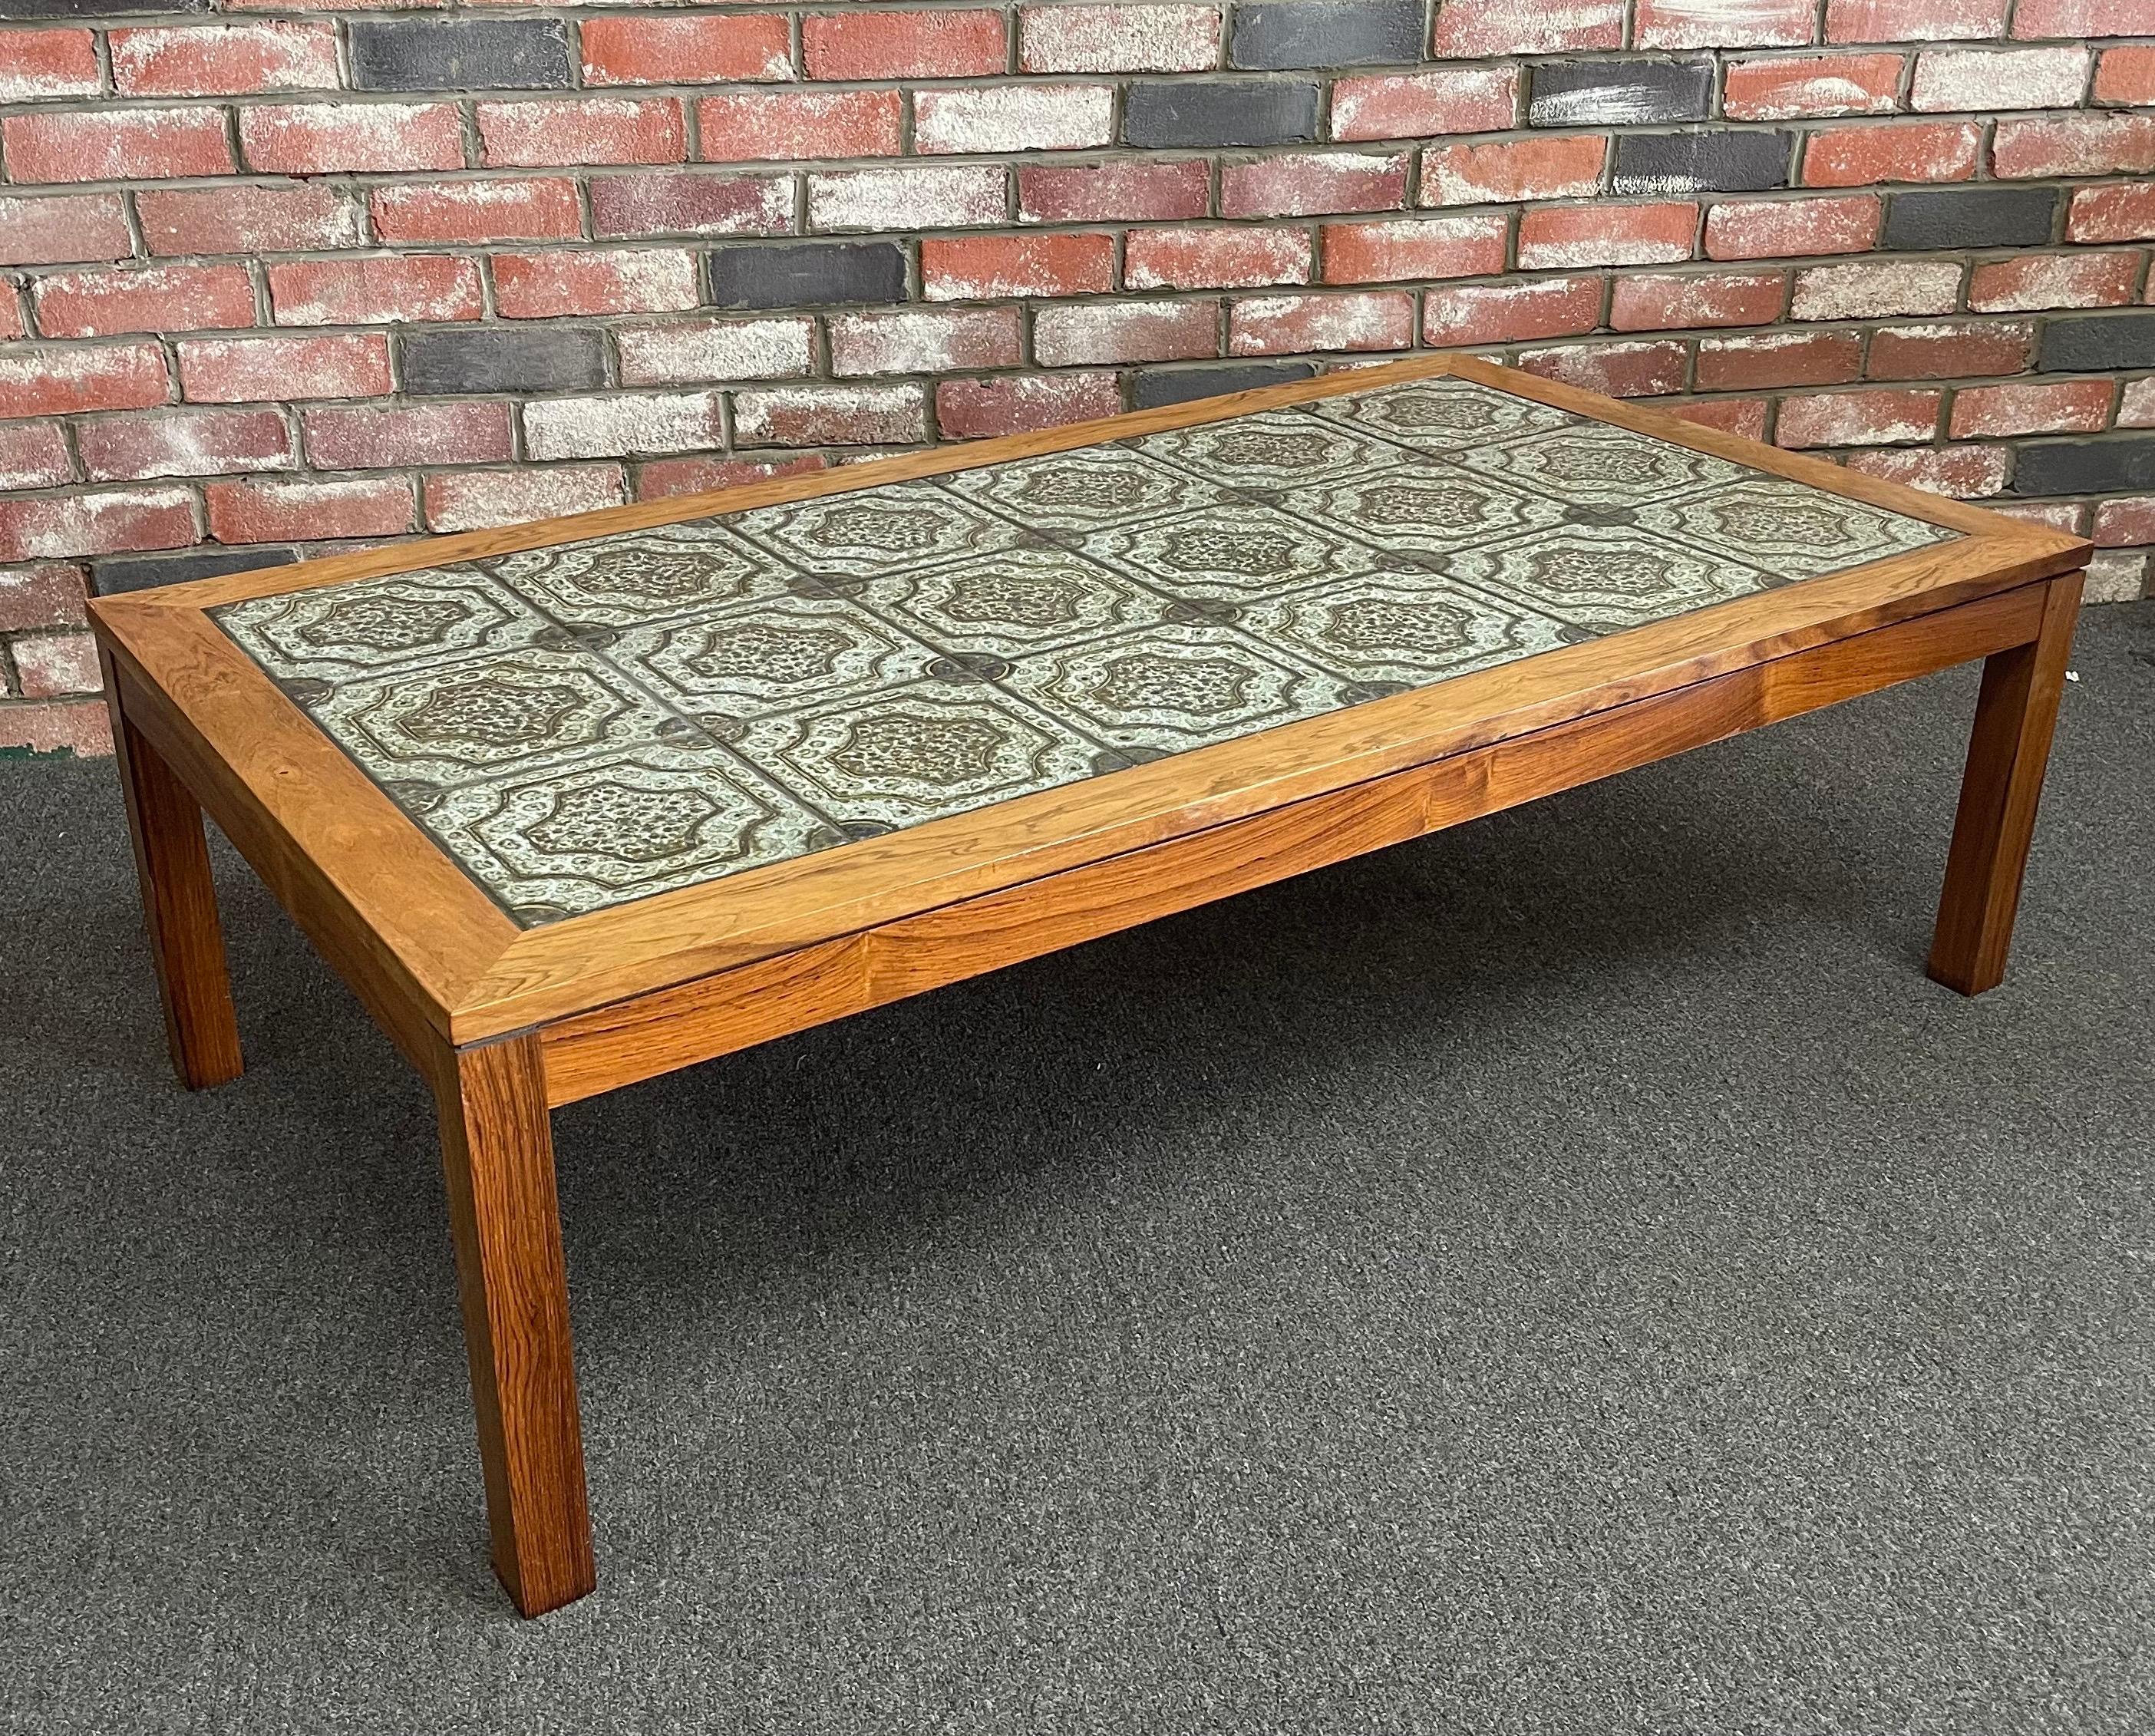 A very cool Mid-Century Modern Danish ceramic tile and rosewood coffee table by Findahls Møbelfabrik, circa 1960s. The piece is in very good vintage condition and would make a statement in any MCM living space. The table measures 53.25